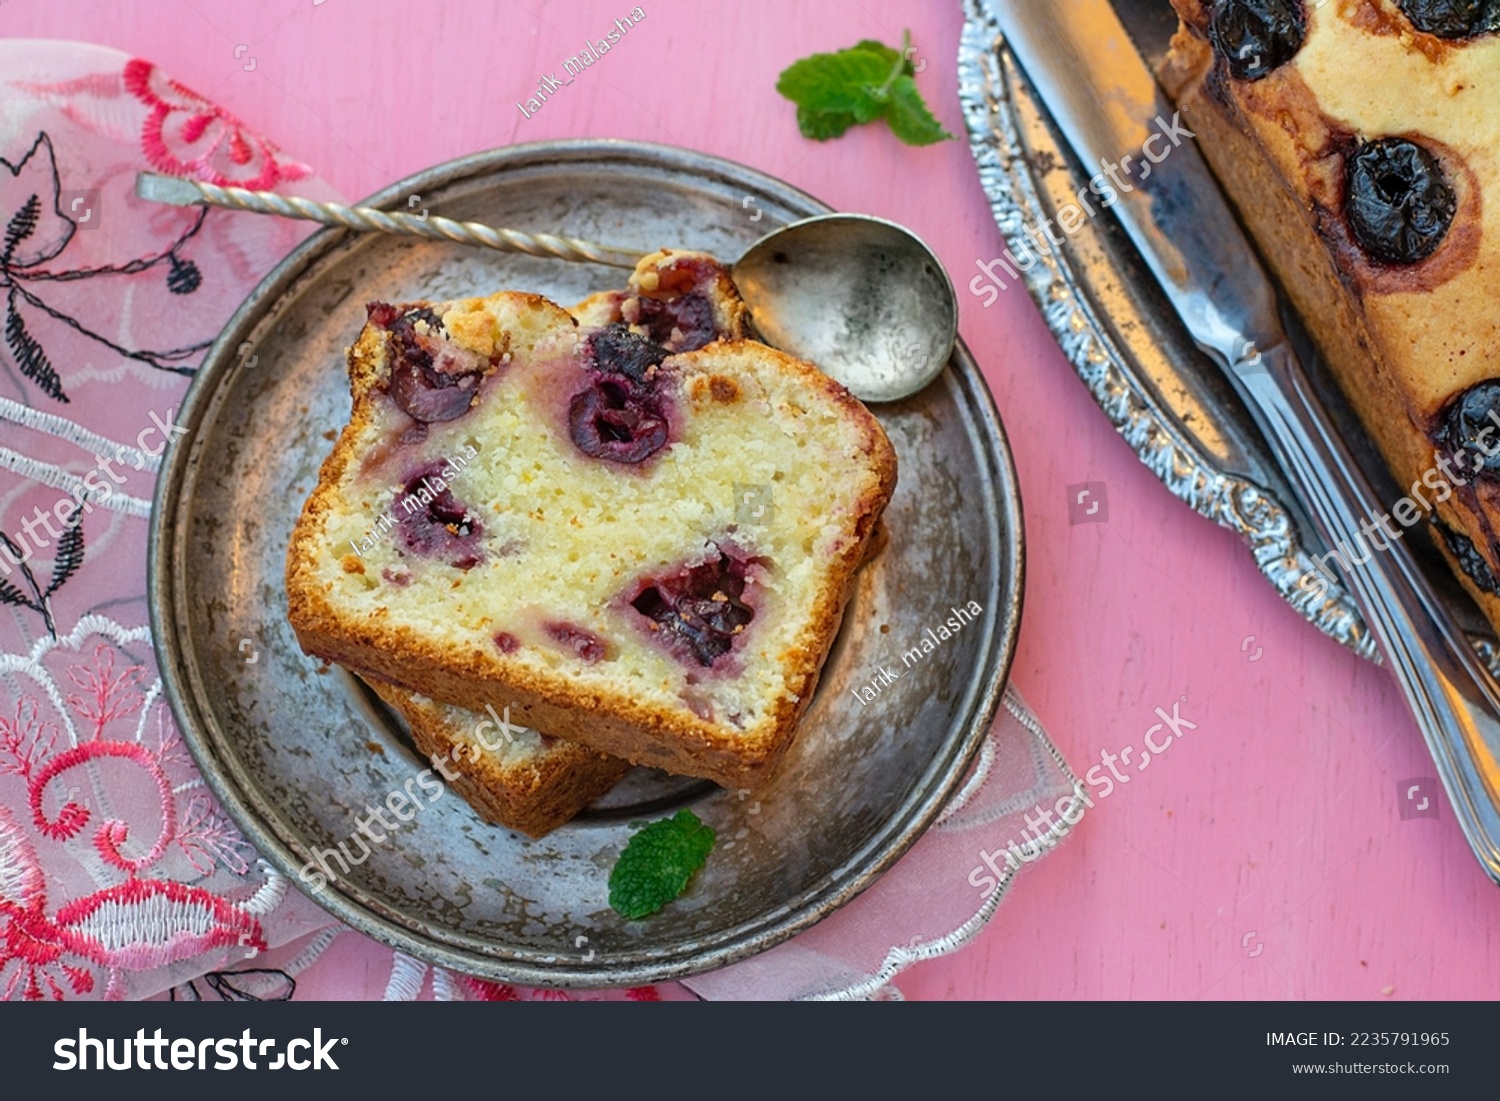 Sweet butter cake with cherries and mascarpone on pink background #2235791965